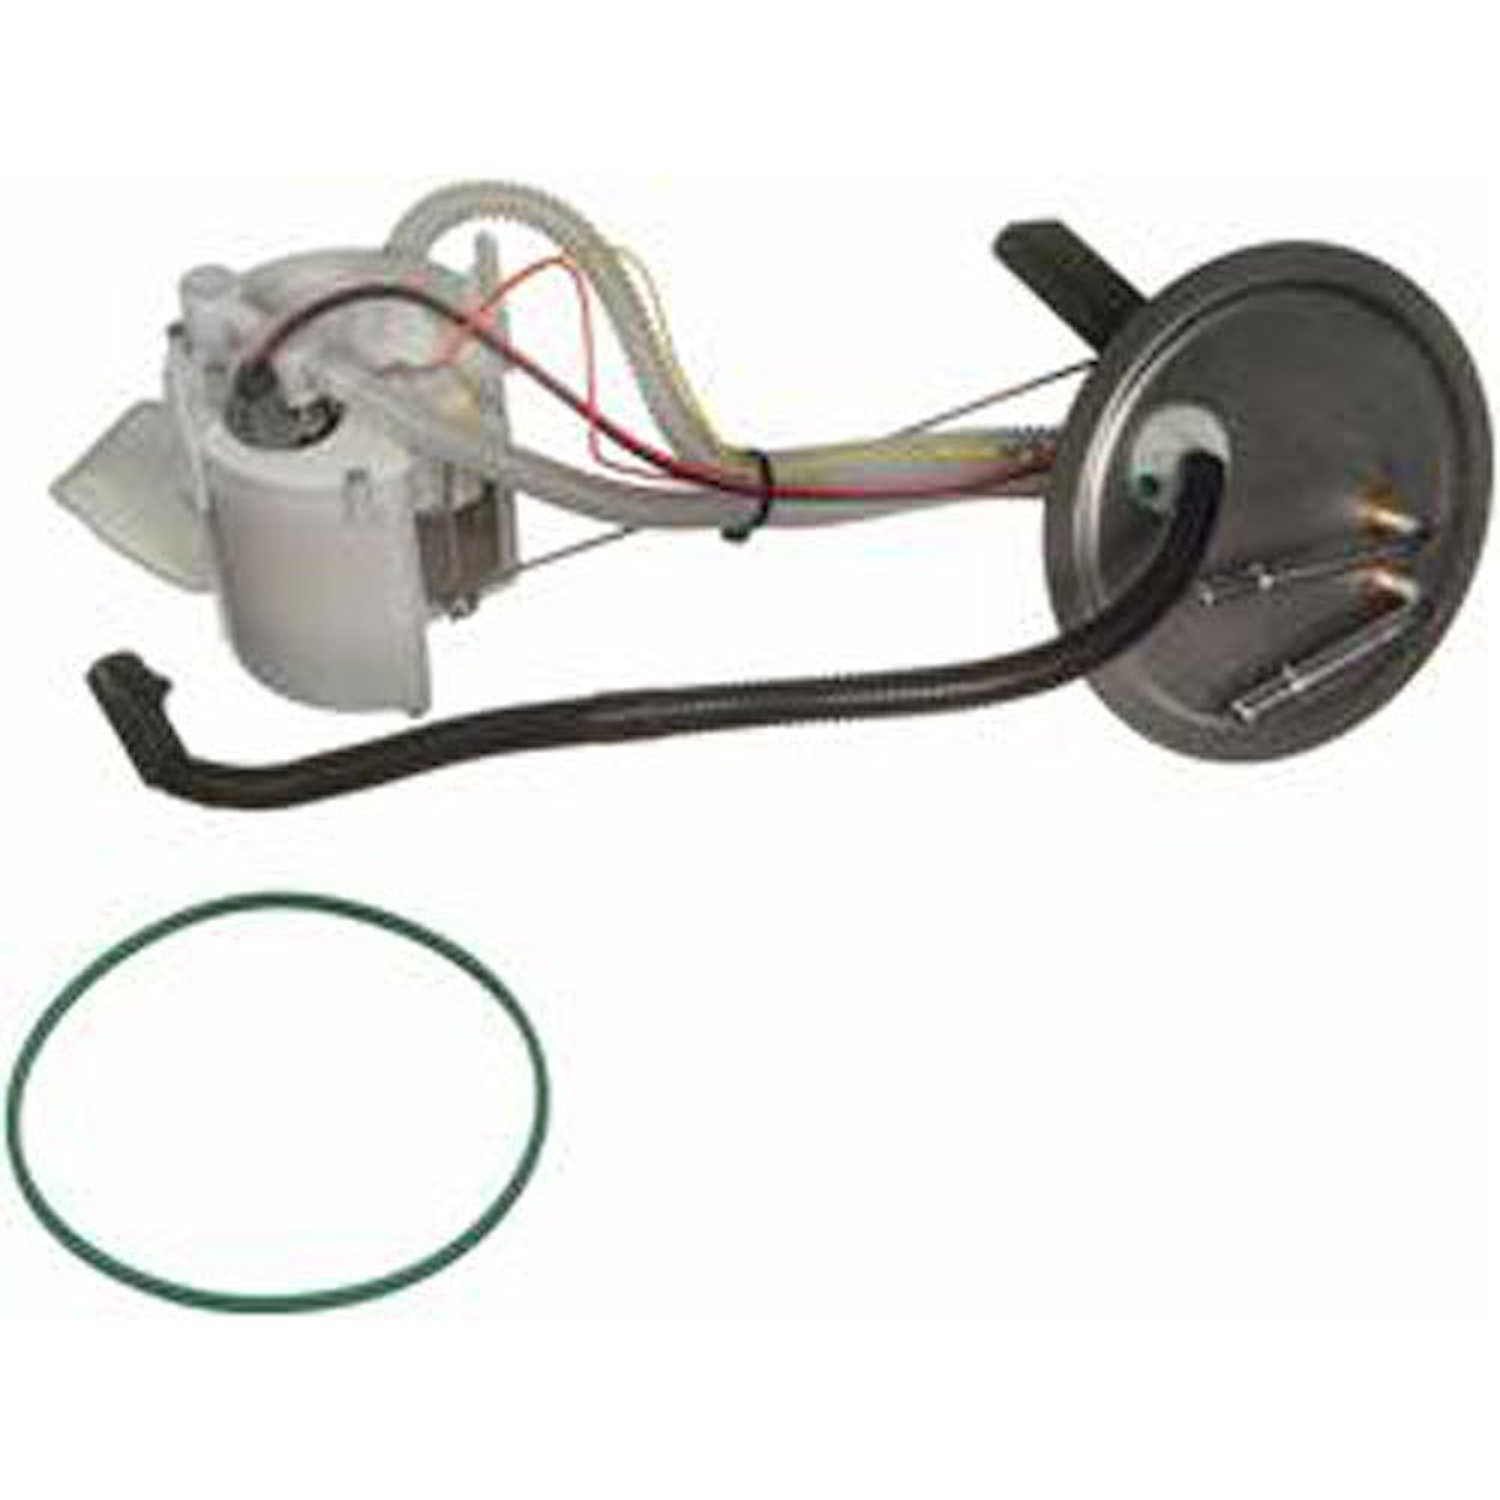 OE Ford Replacement Electric Fuel Pump Module Assembly 2000-05 Ford Excursion 5.4L/6.8L V8